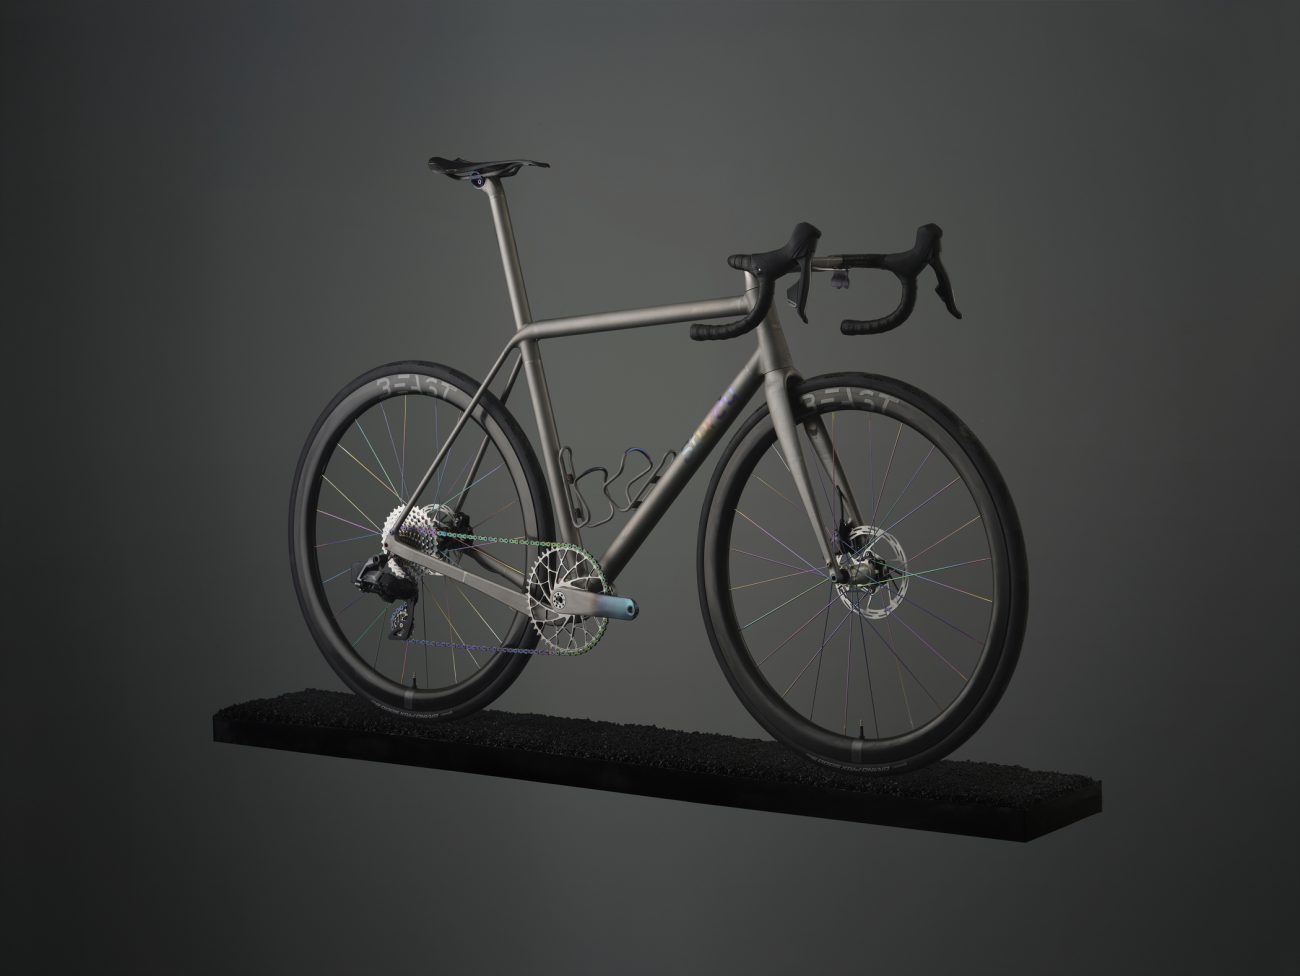 Studio photo of a Sturdy Cycles titanium 3D printed road bike floating on a small strip of tarmac